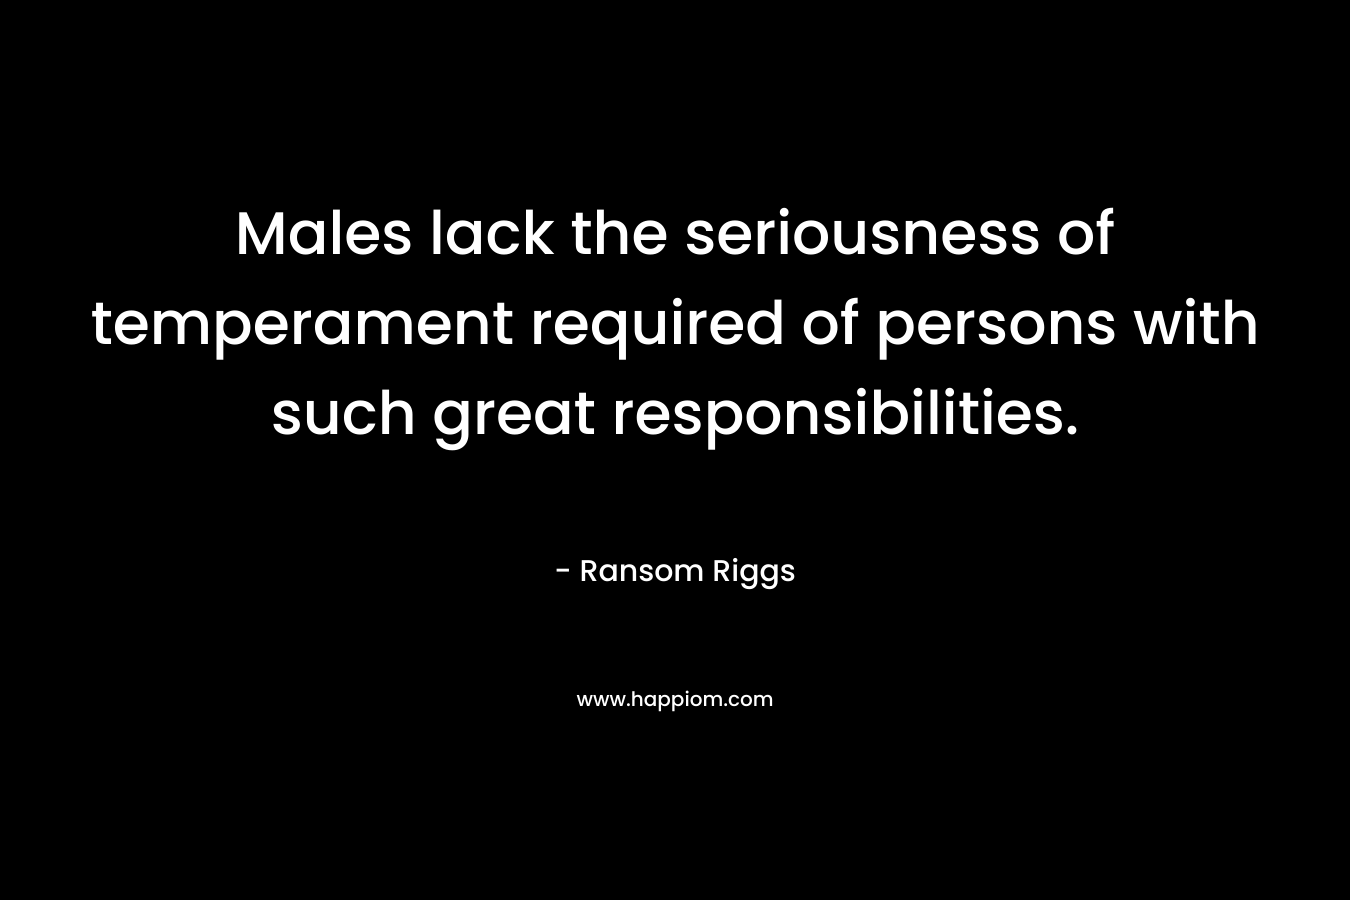 Males lack the seriousness of temperament required of persons with such great responsibilities. – Ransom Riggs